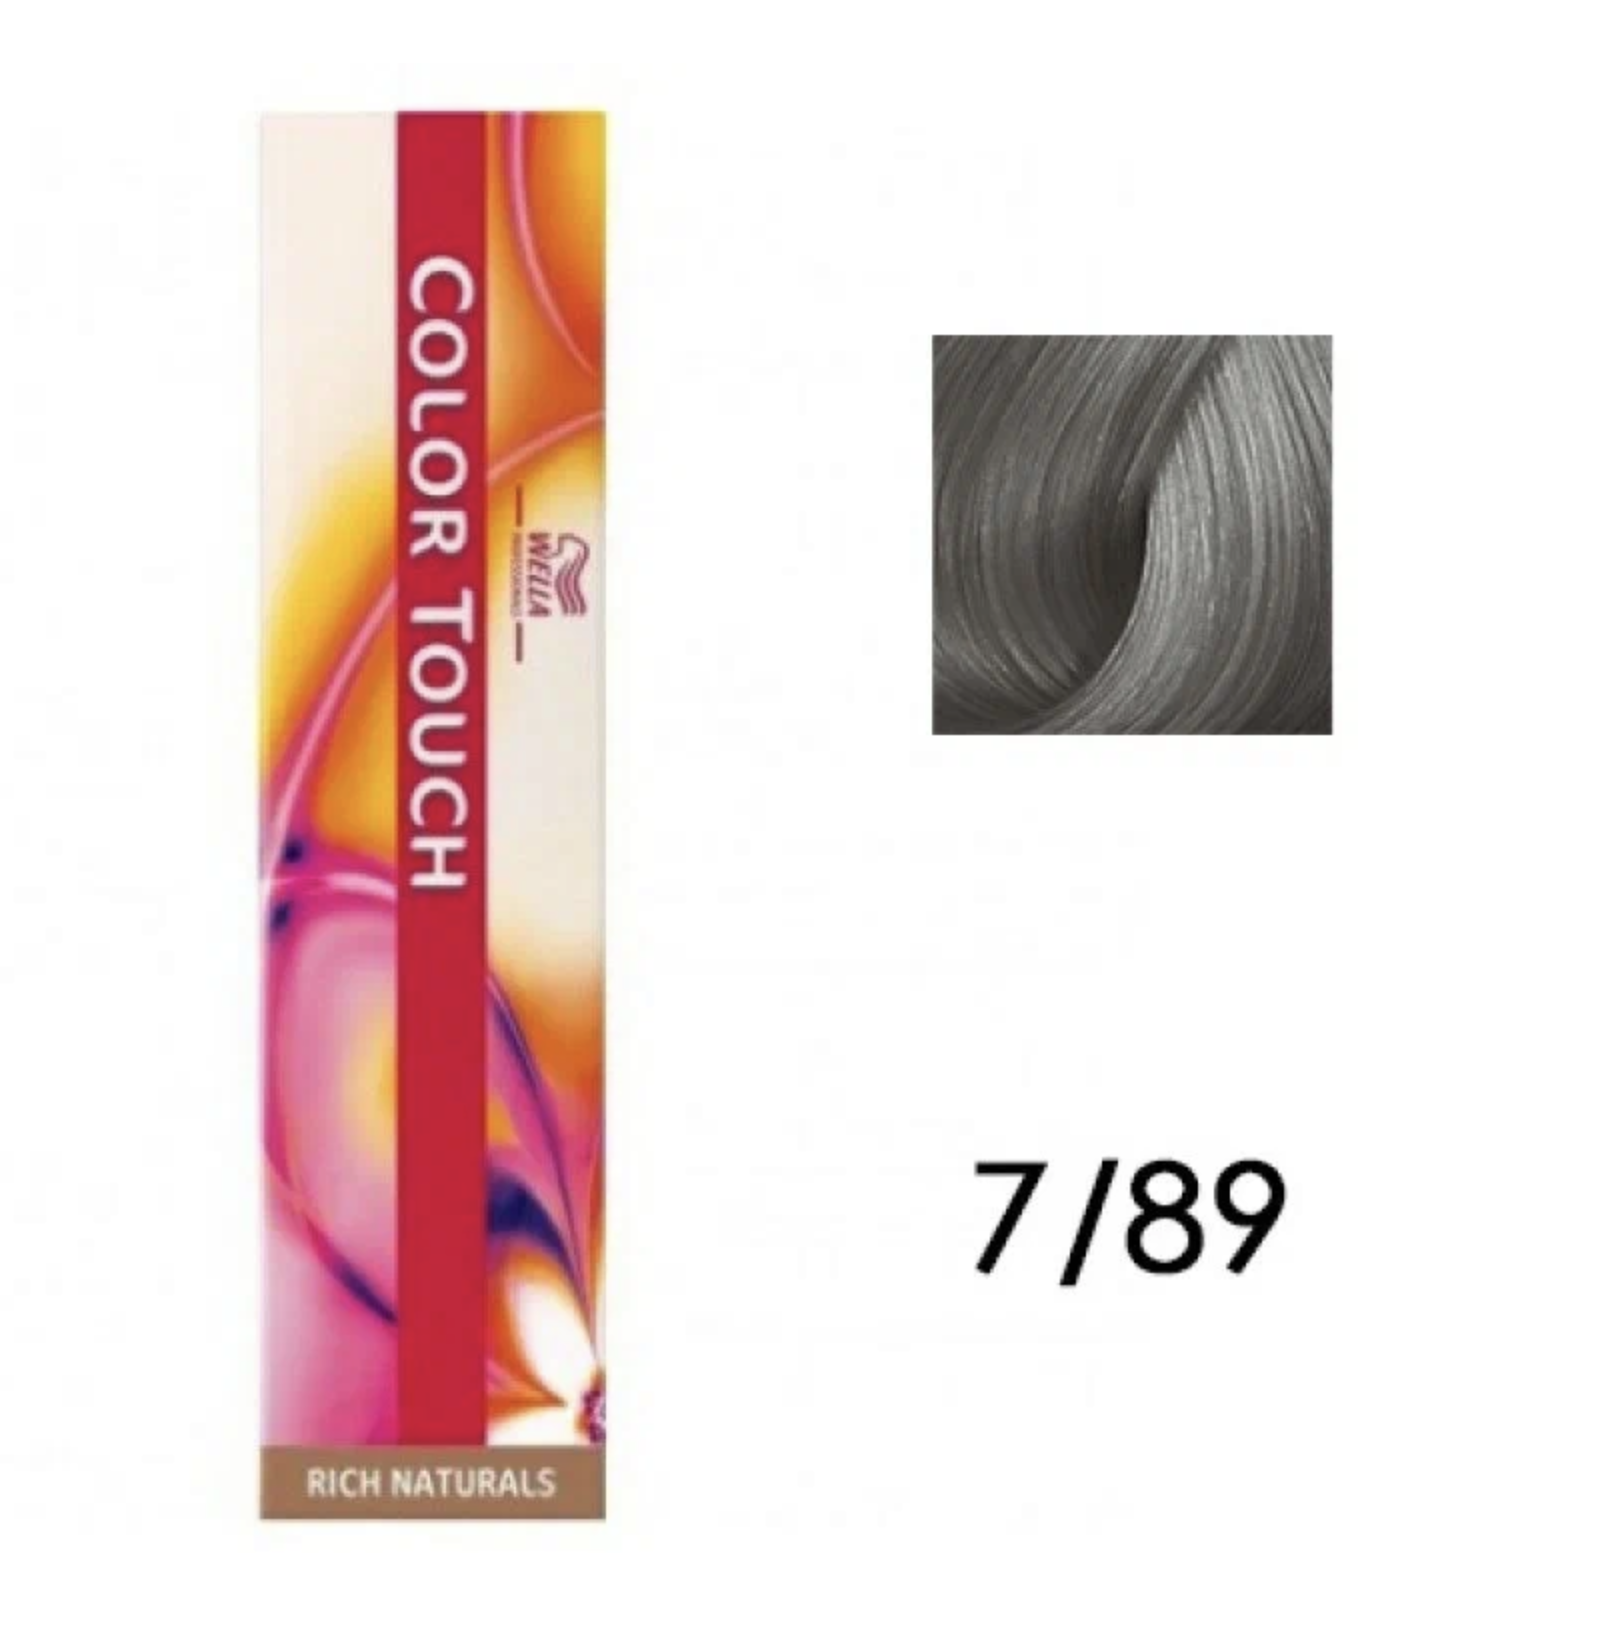   / Wella Color Touch - -    7/89   60 